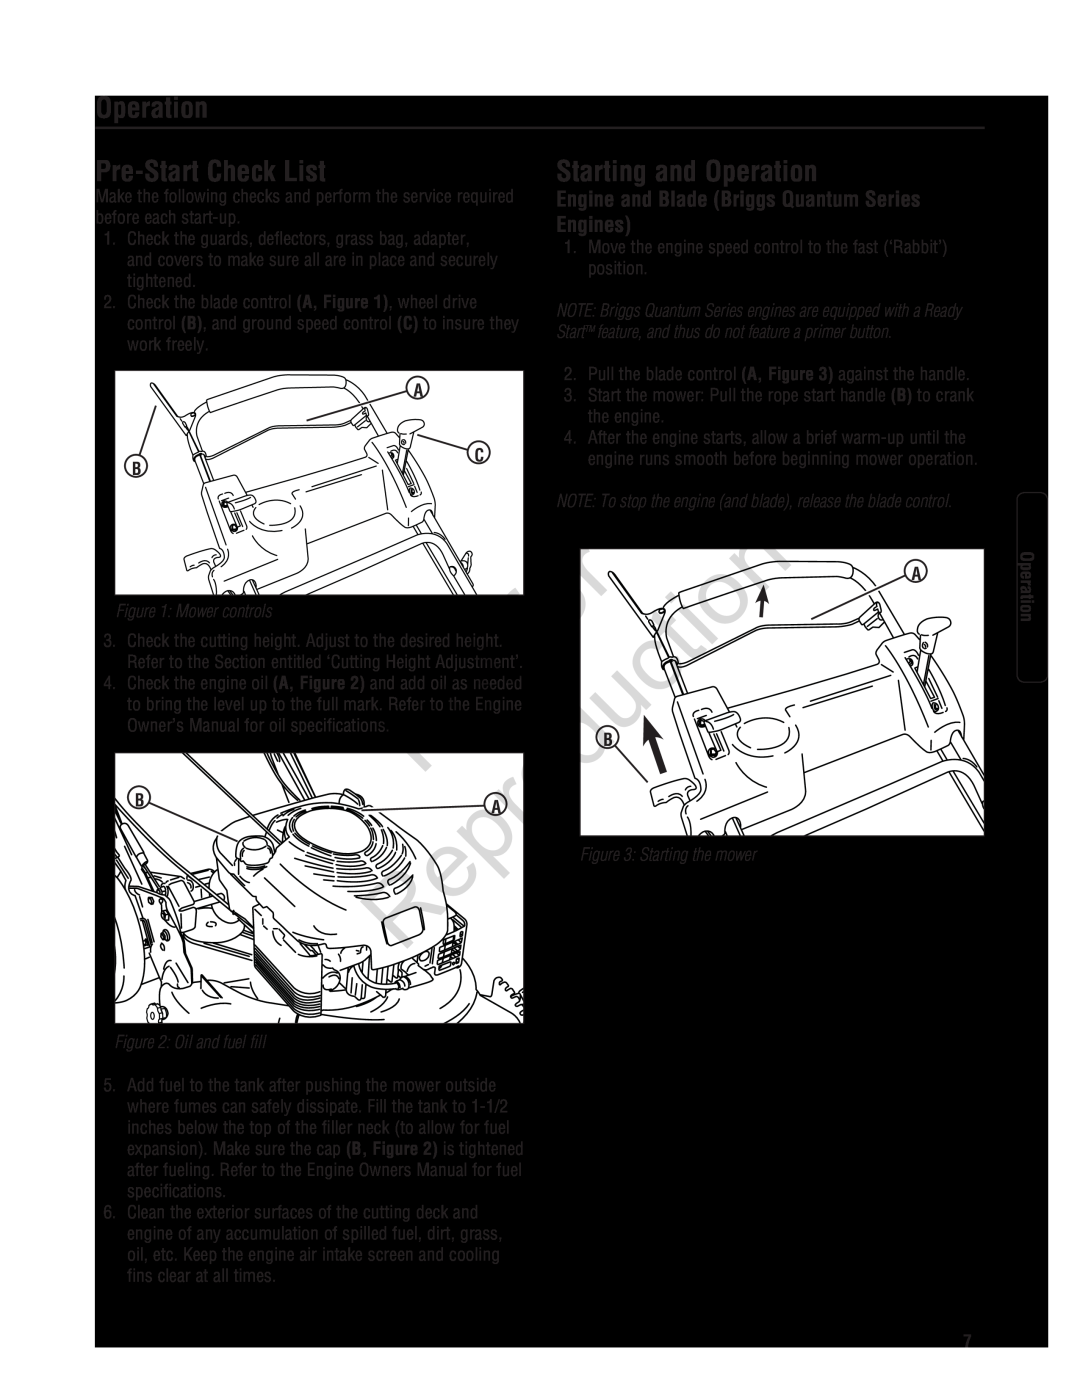 Snapper 7800601 Pre-StartCheck List, Starting and Operation, Engines, Reproduction, Mower controls, Starting the mower 